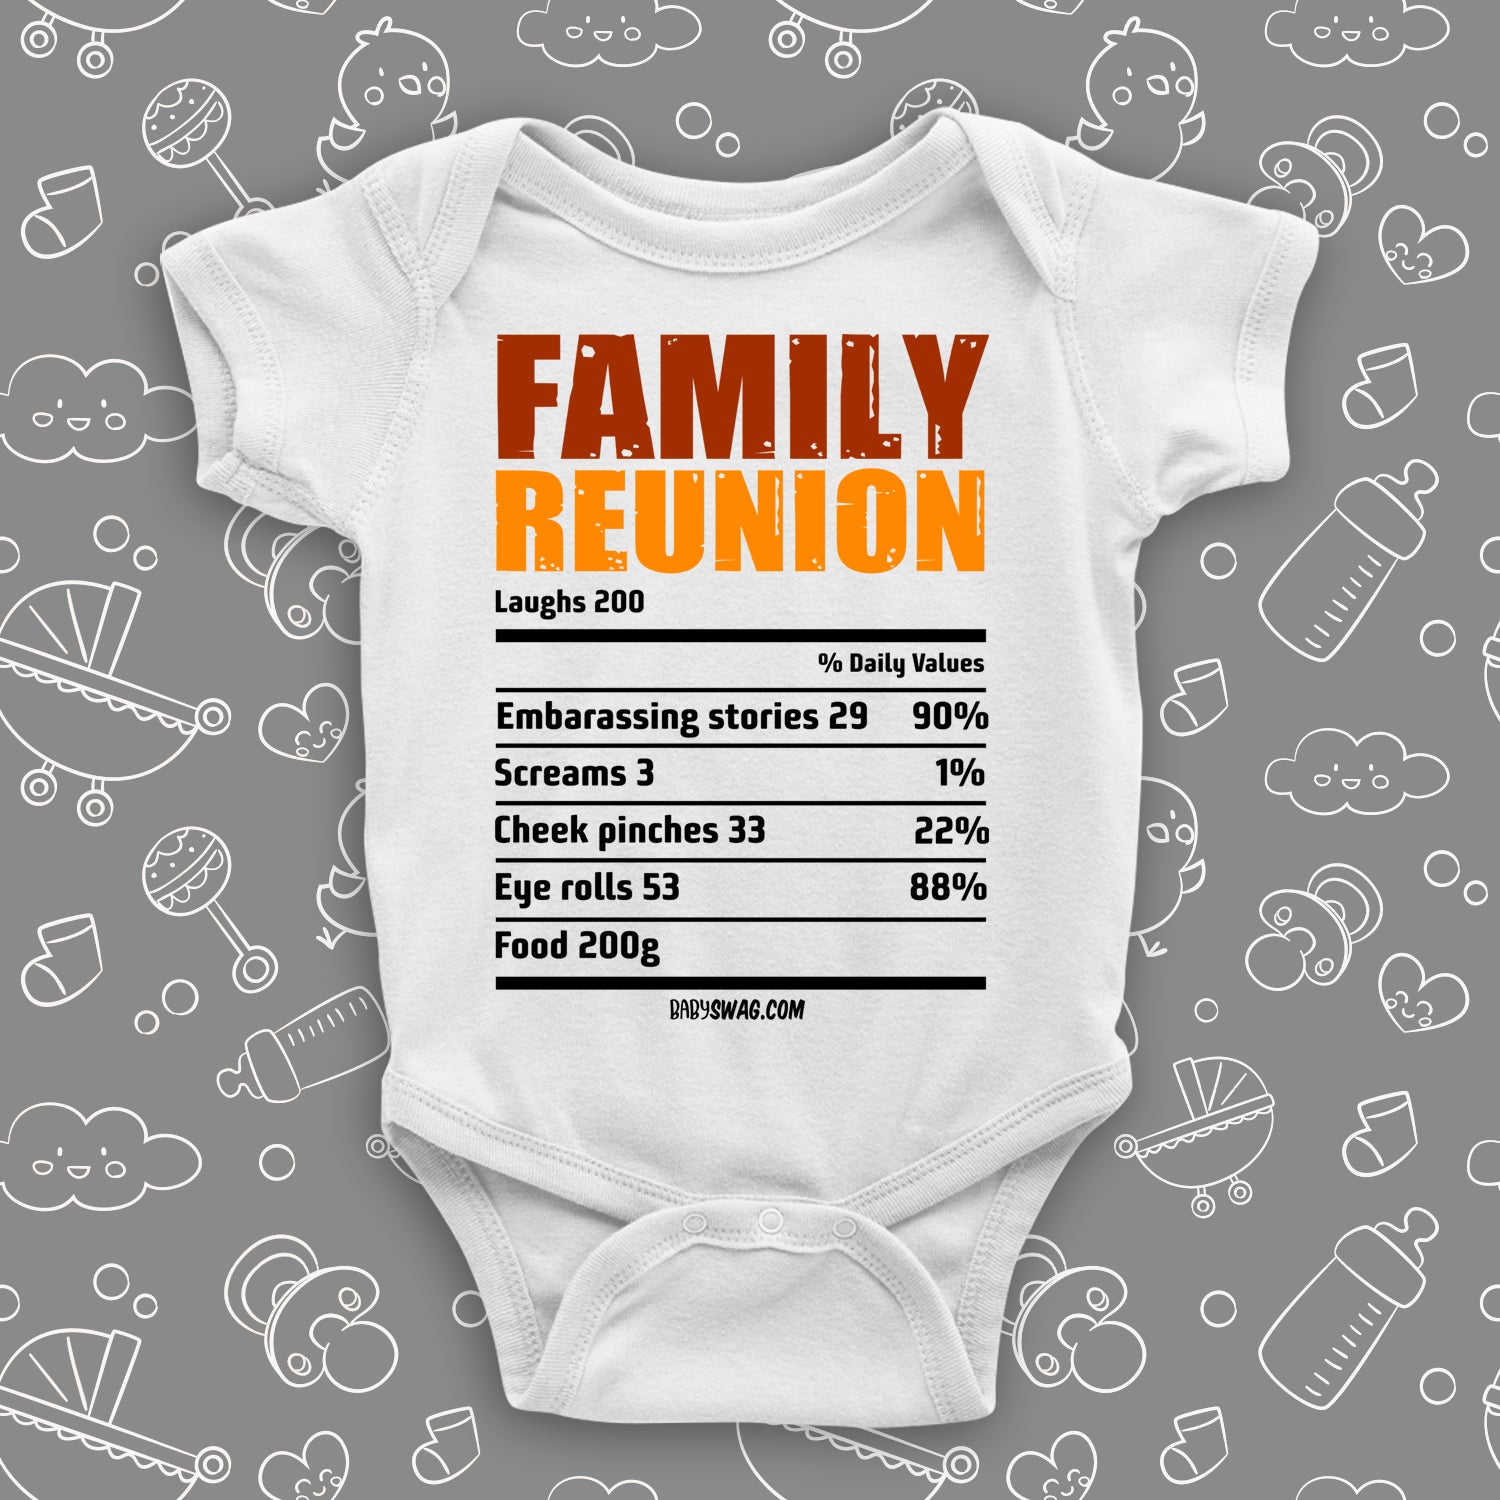 The "Family Reunion" cute baby onesies in white. 